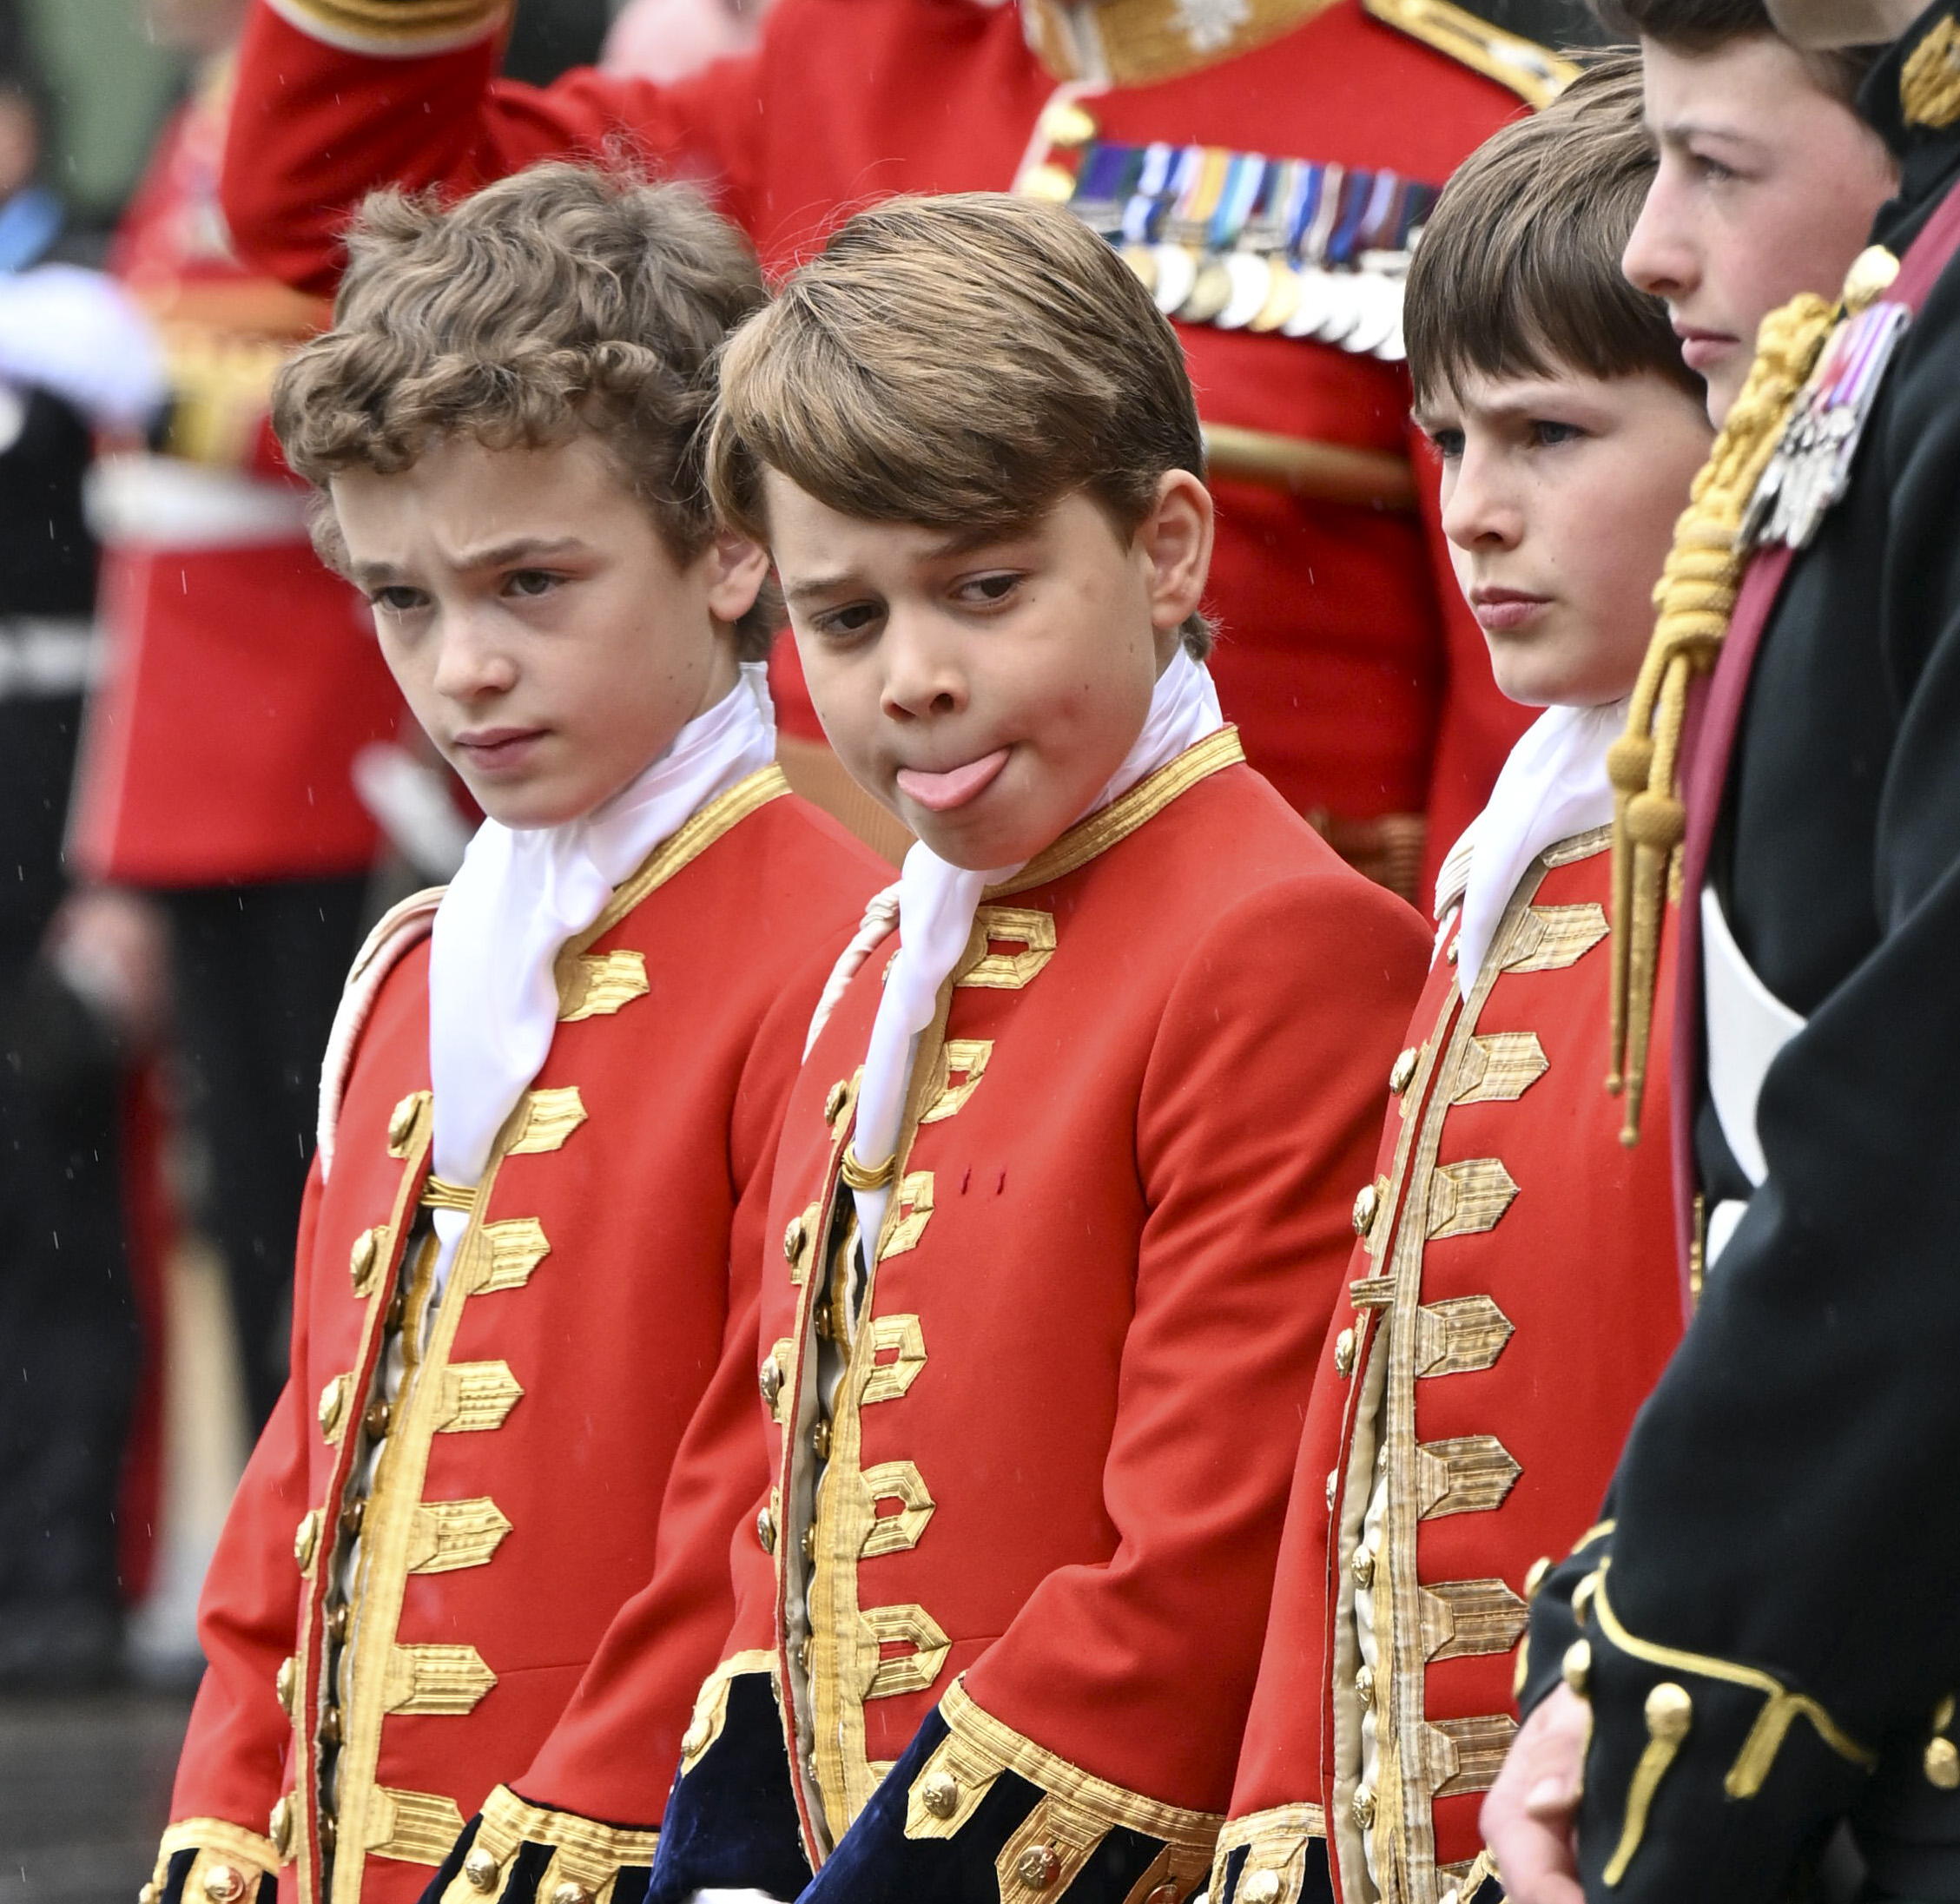 <p>Prince George, the page of honor, made a face alongside the other pages at <a href="https://www.wonderwall.com/celebrity/the-coronation-of-king-charles-iii-and-queen-camilla-the-best-pictures-of-all-the-royals-at-this-historic-event-735015.gallery">the coronation ceremony</a> of King Charles III and Queen Camilla in Westminster Abbey in London on May 6, 2023.</p>